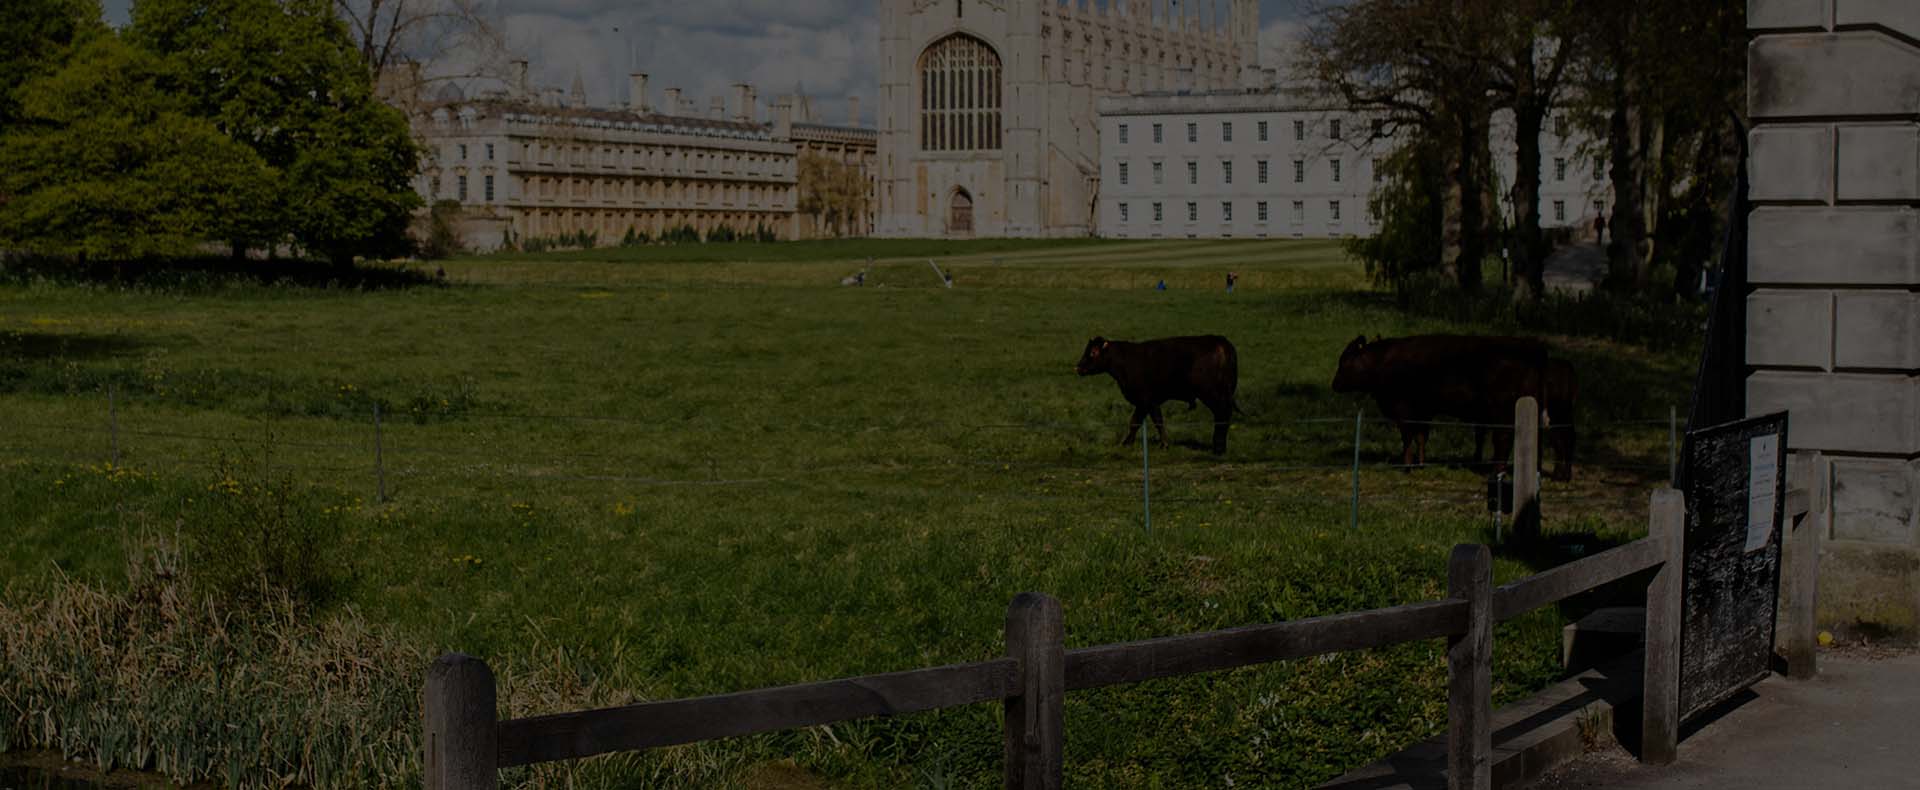 Kings College in Cambridge, a stone made univeristy building with a field in front with cows and trees.